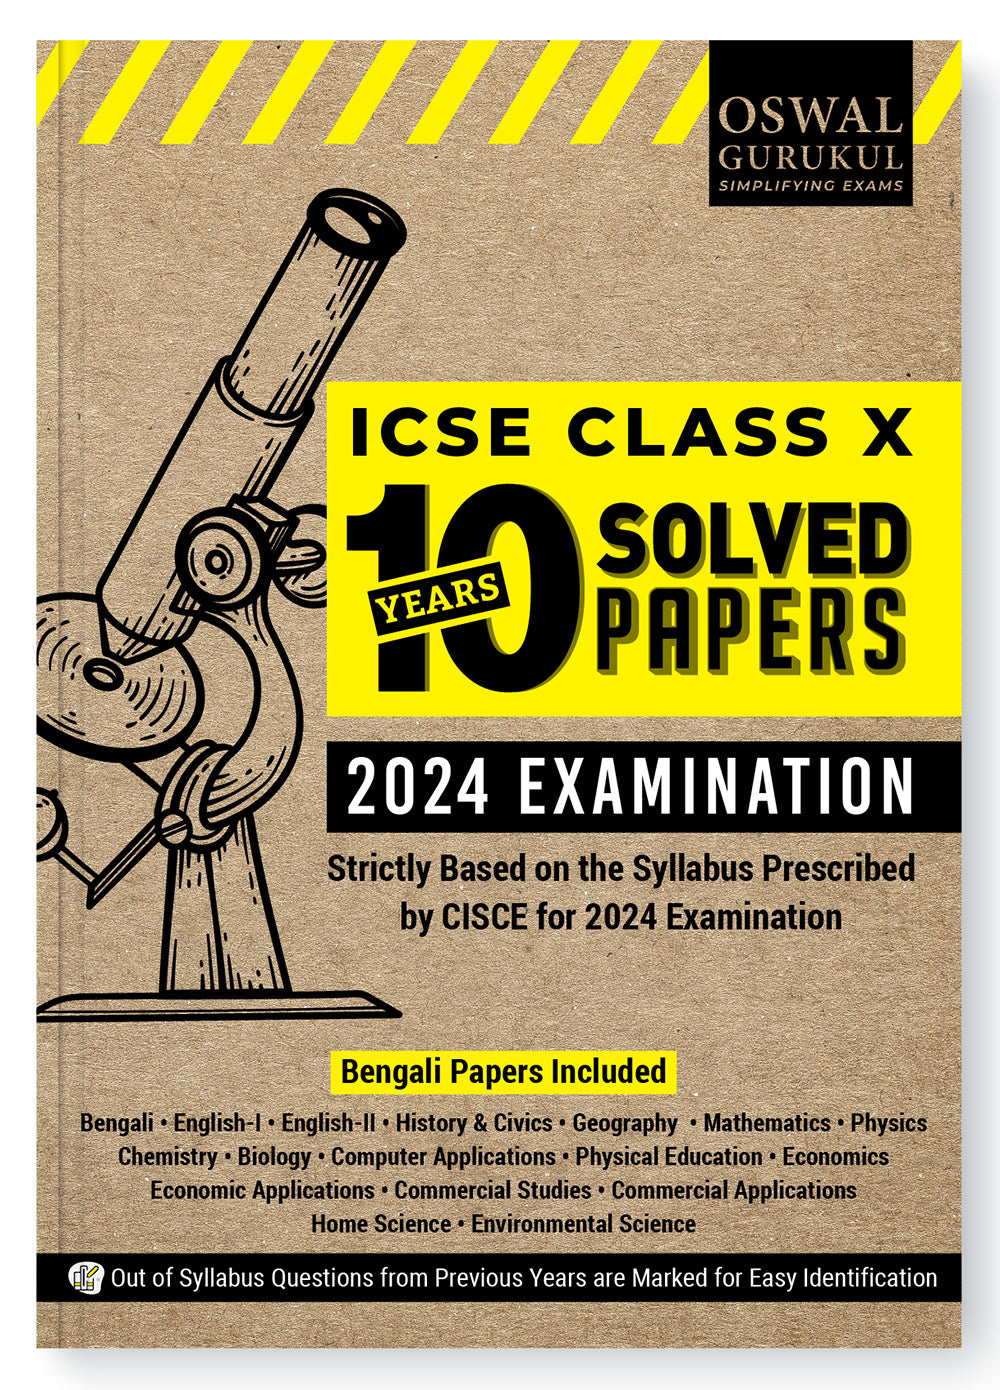 Oswal - Gurukul 10 Years Solved Papers (Bengali Papers Included) for ICSE Class 10 Exam 2024 - Comprehensive Handbook of 18 Subjects - Yearwise Board Solutions, Revised Syllabus